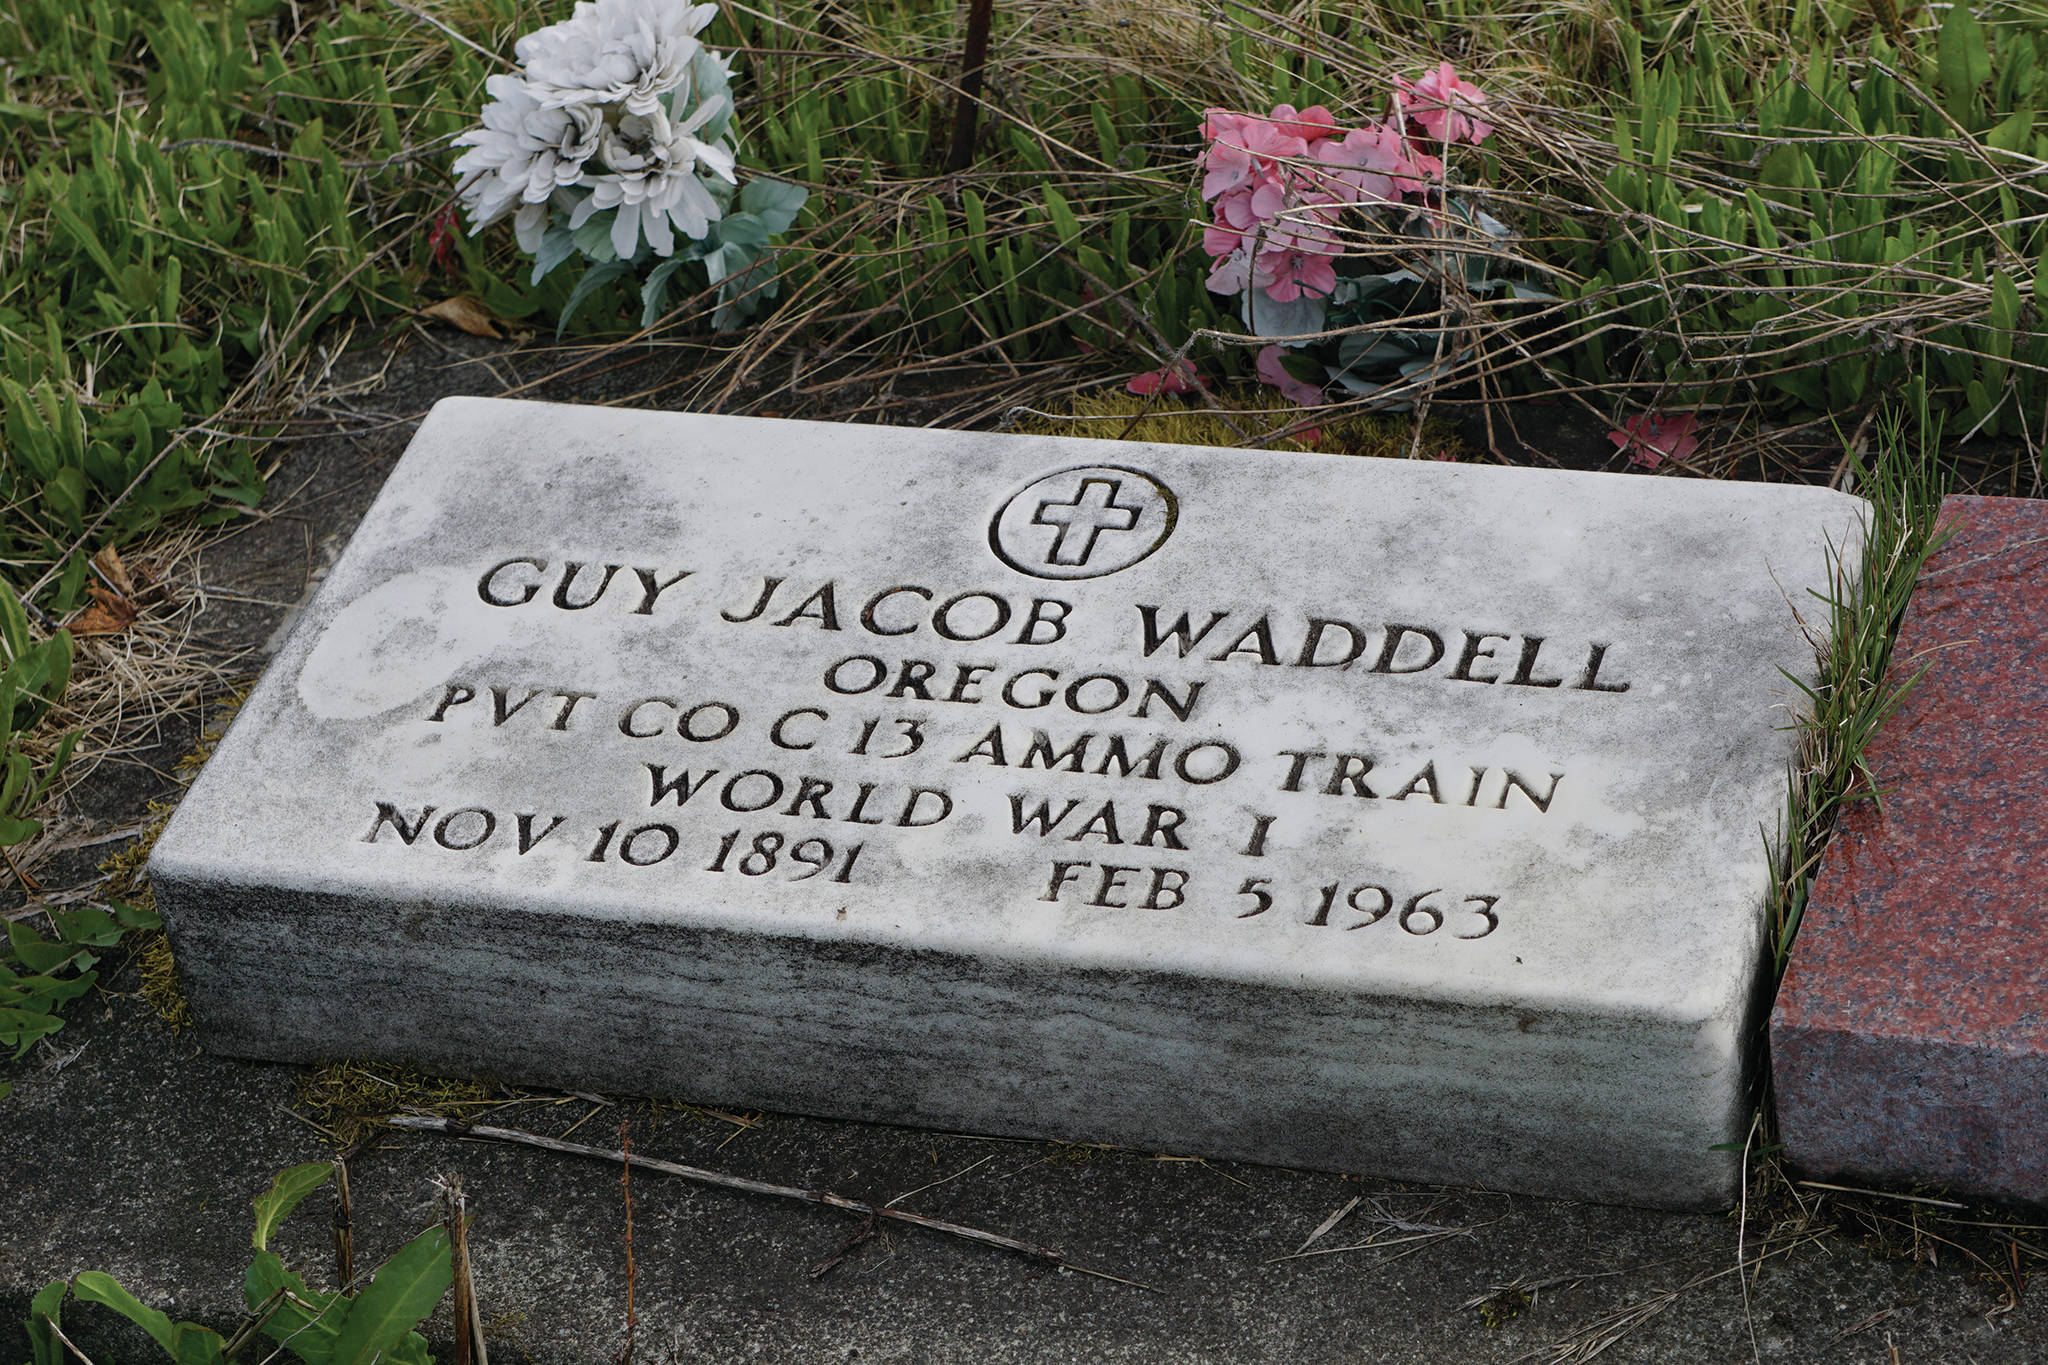 World War I veteran Guy Waddell’s grave is one of many veterans who are buried in the Hickerson Memorial Cemetery on Diamond Ridge near Homer, Alaska. Memorial Day observances were held at the cemetery on Monday, May 25, 2020. (Photo by Michael Armstrong/Homer News)